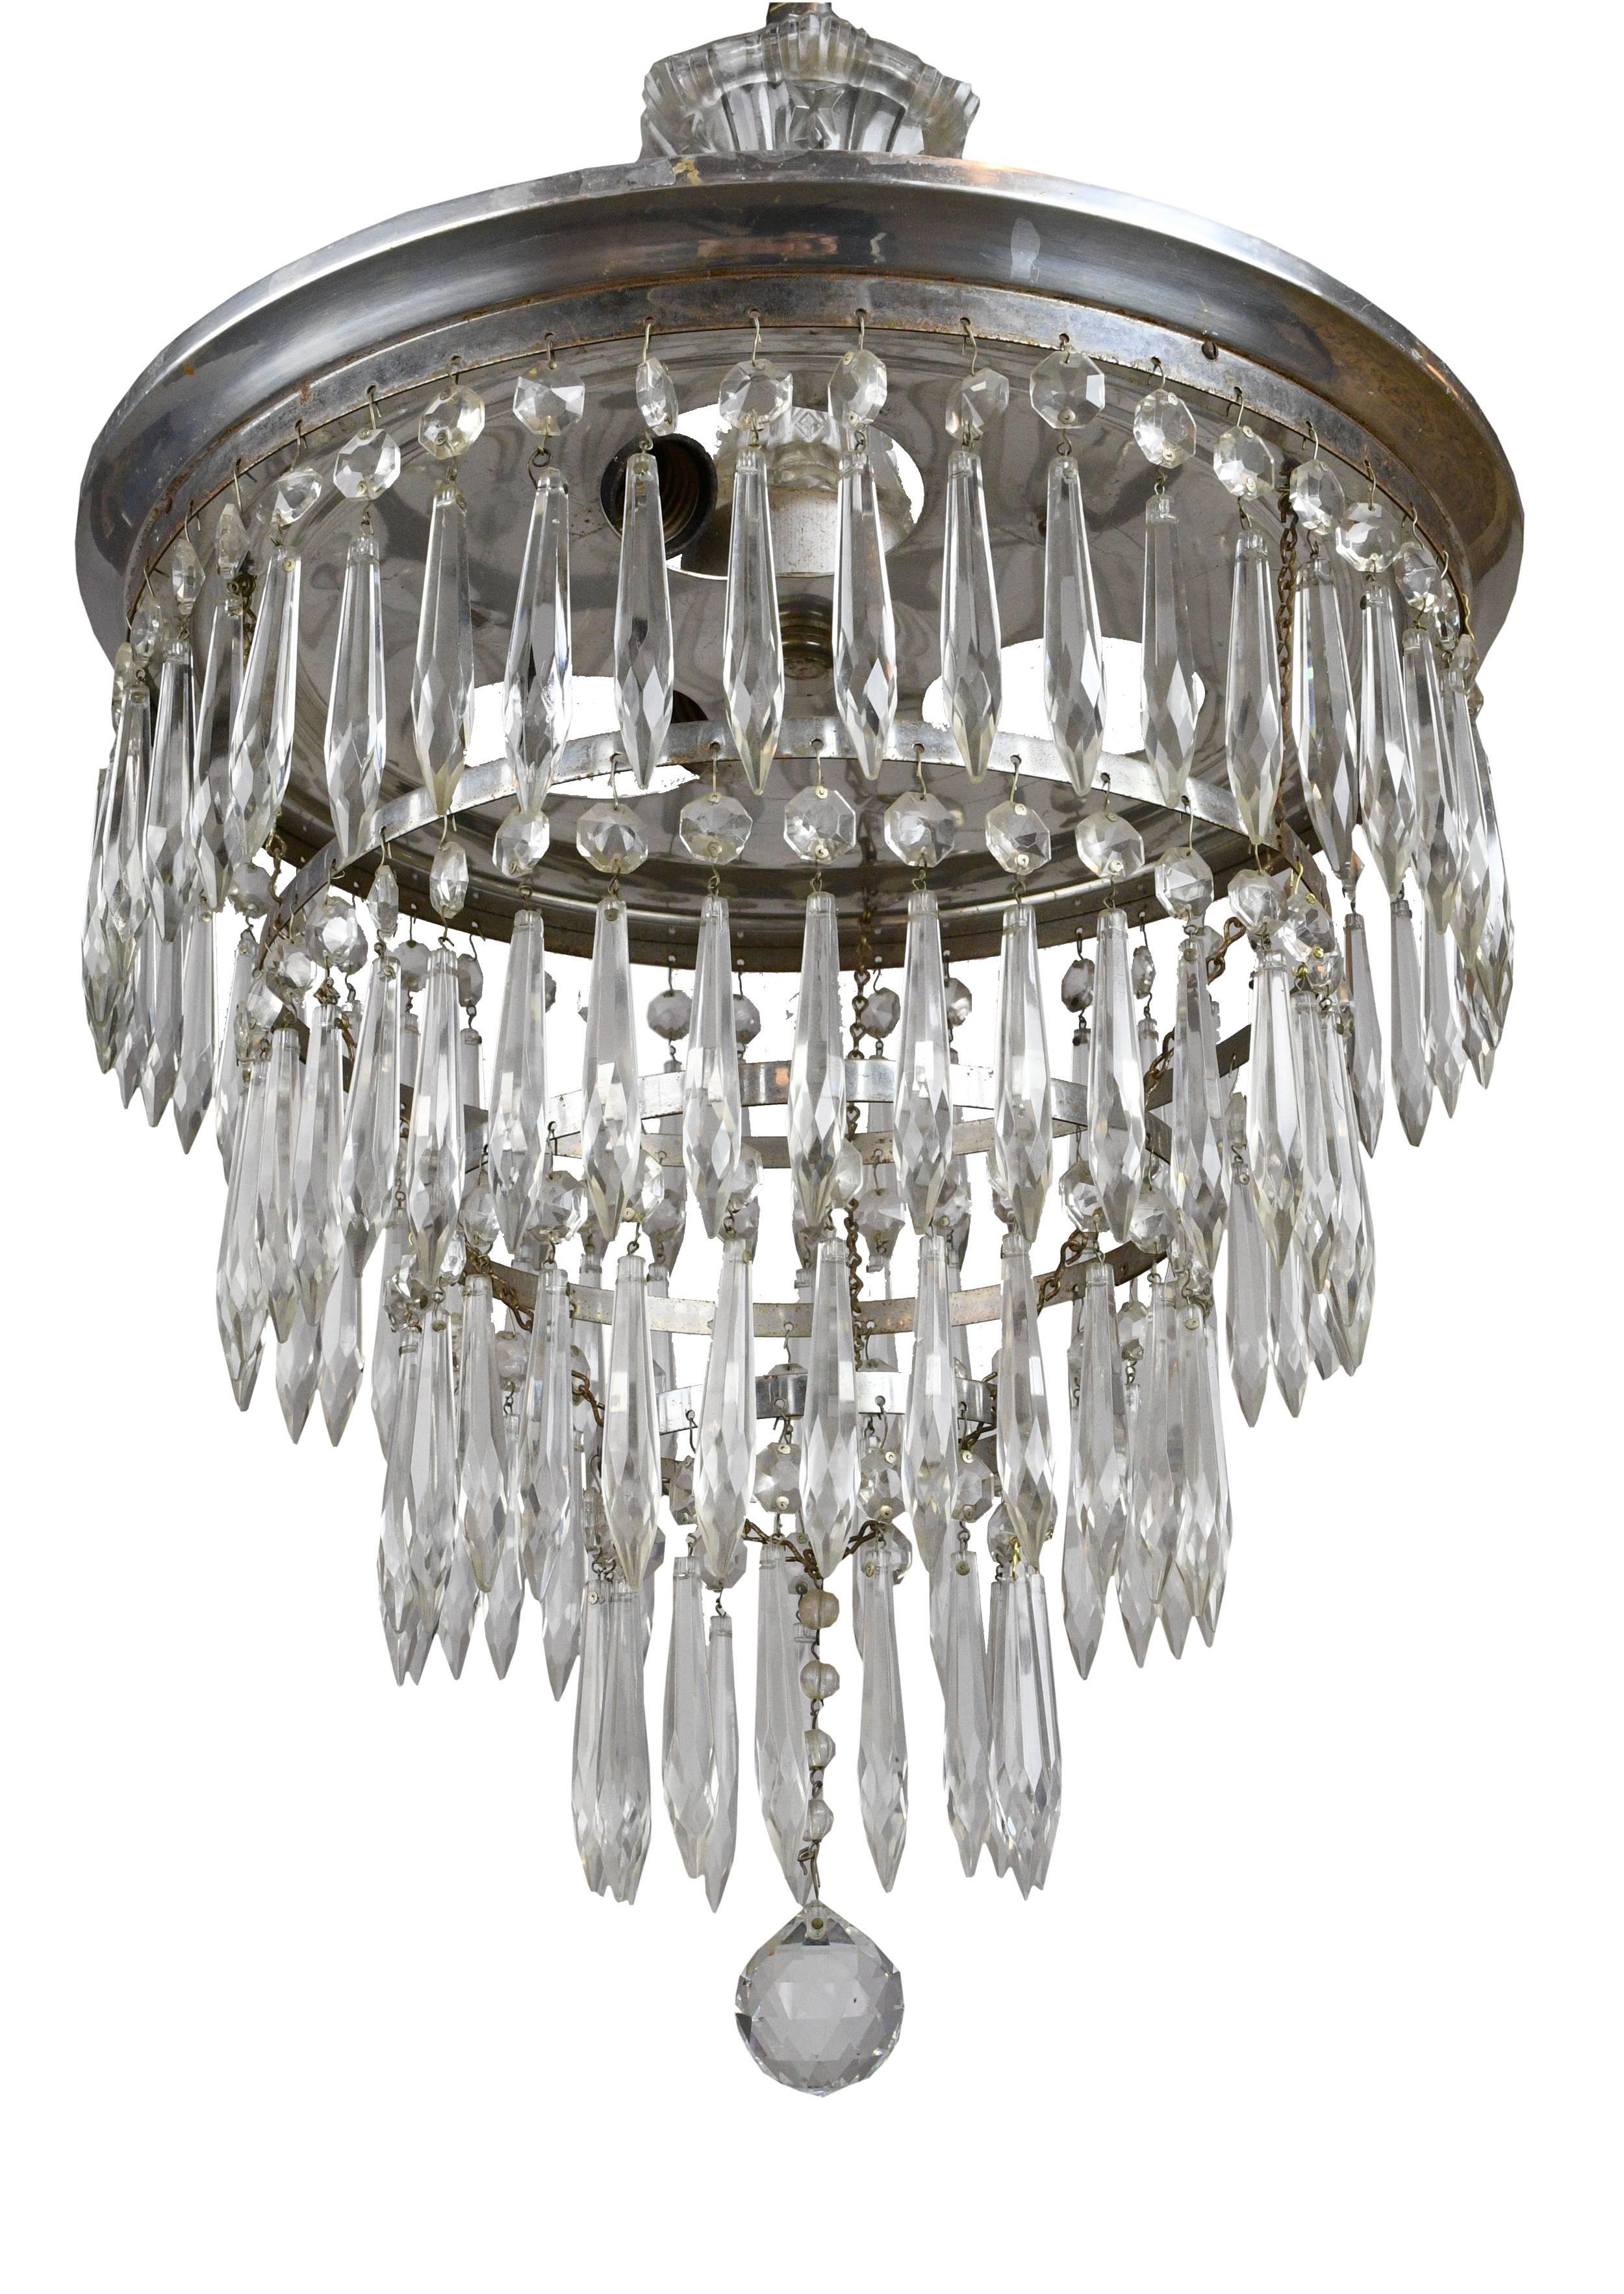 Early 20th Century Silver Plated Wedding Cake Chandelier